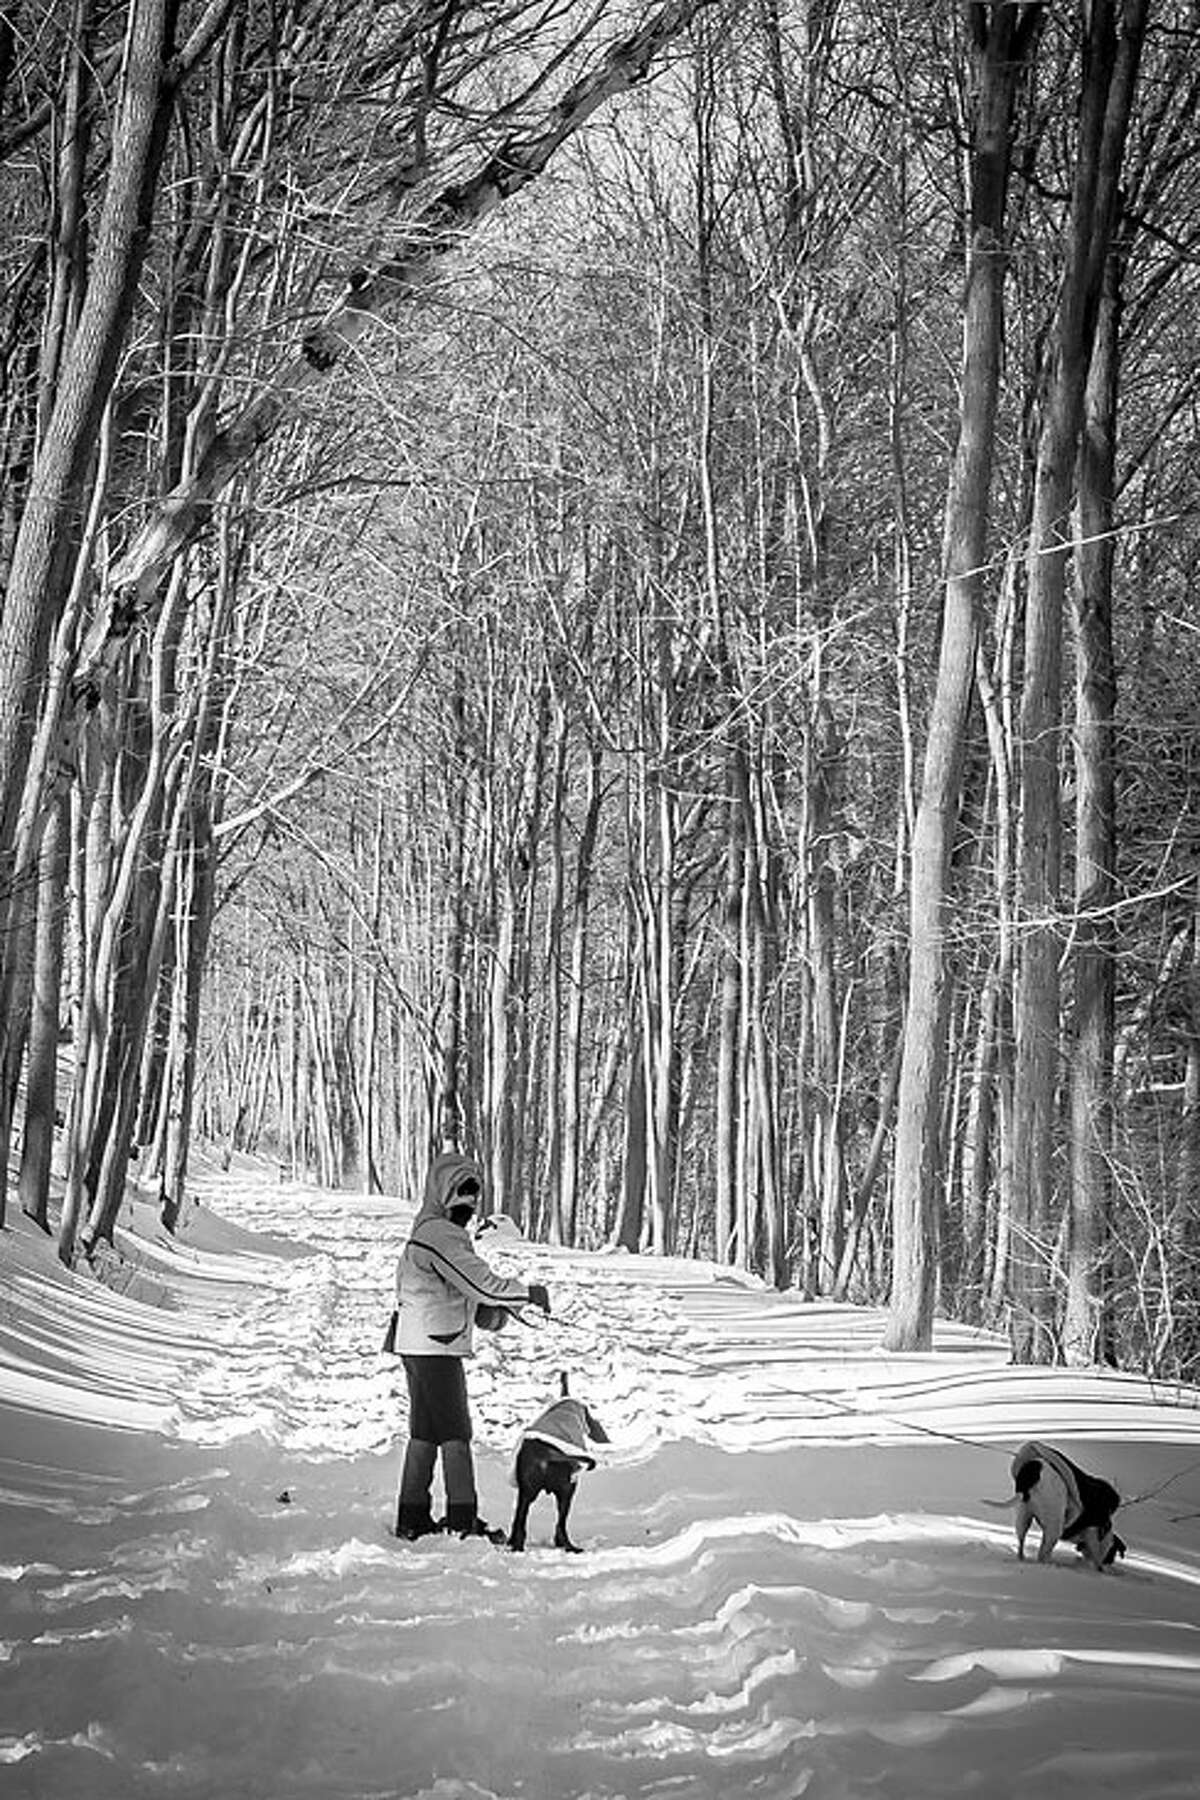 Pequonnock River Trail Winter Dog Walker by Derek Sterling won first place in the "Trumbullites in Winter" category.